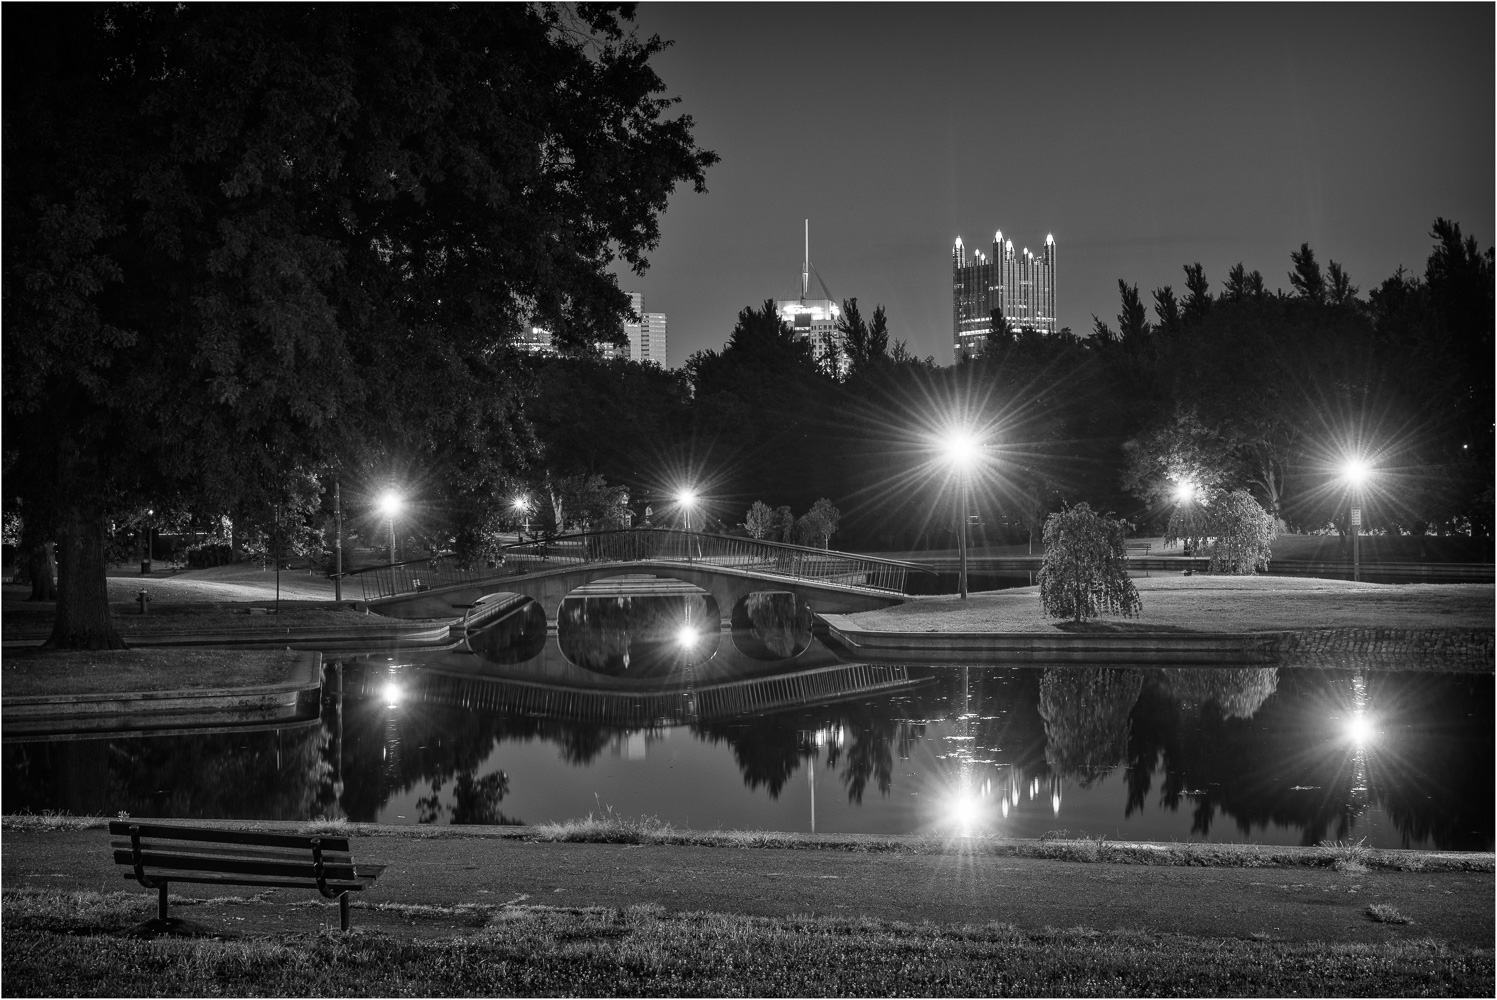 Contrasts-In-The-Park-BW.jpg